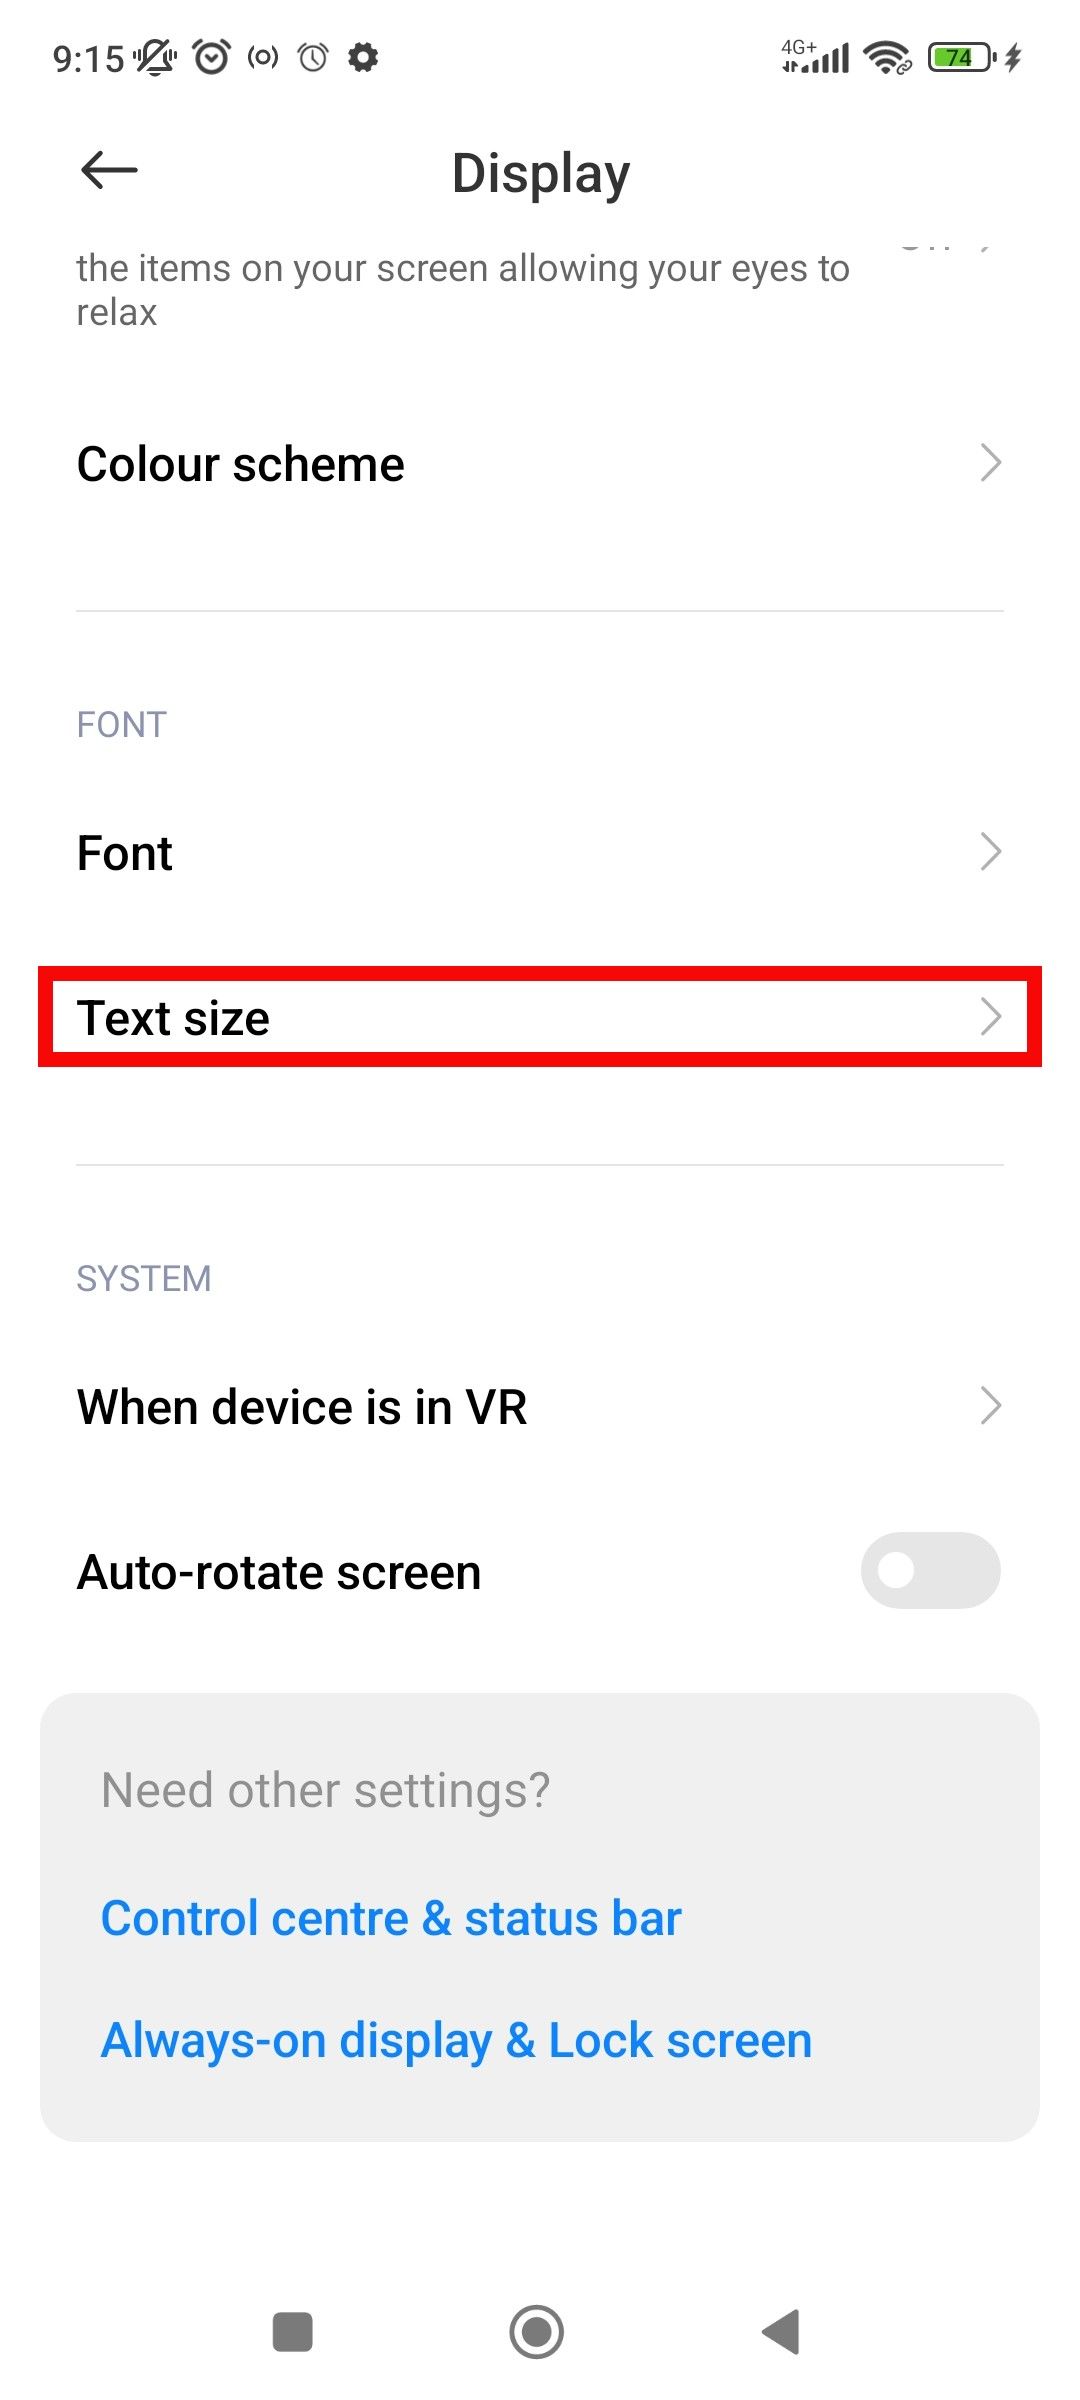 Display highlighting Text size